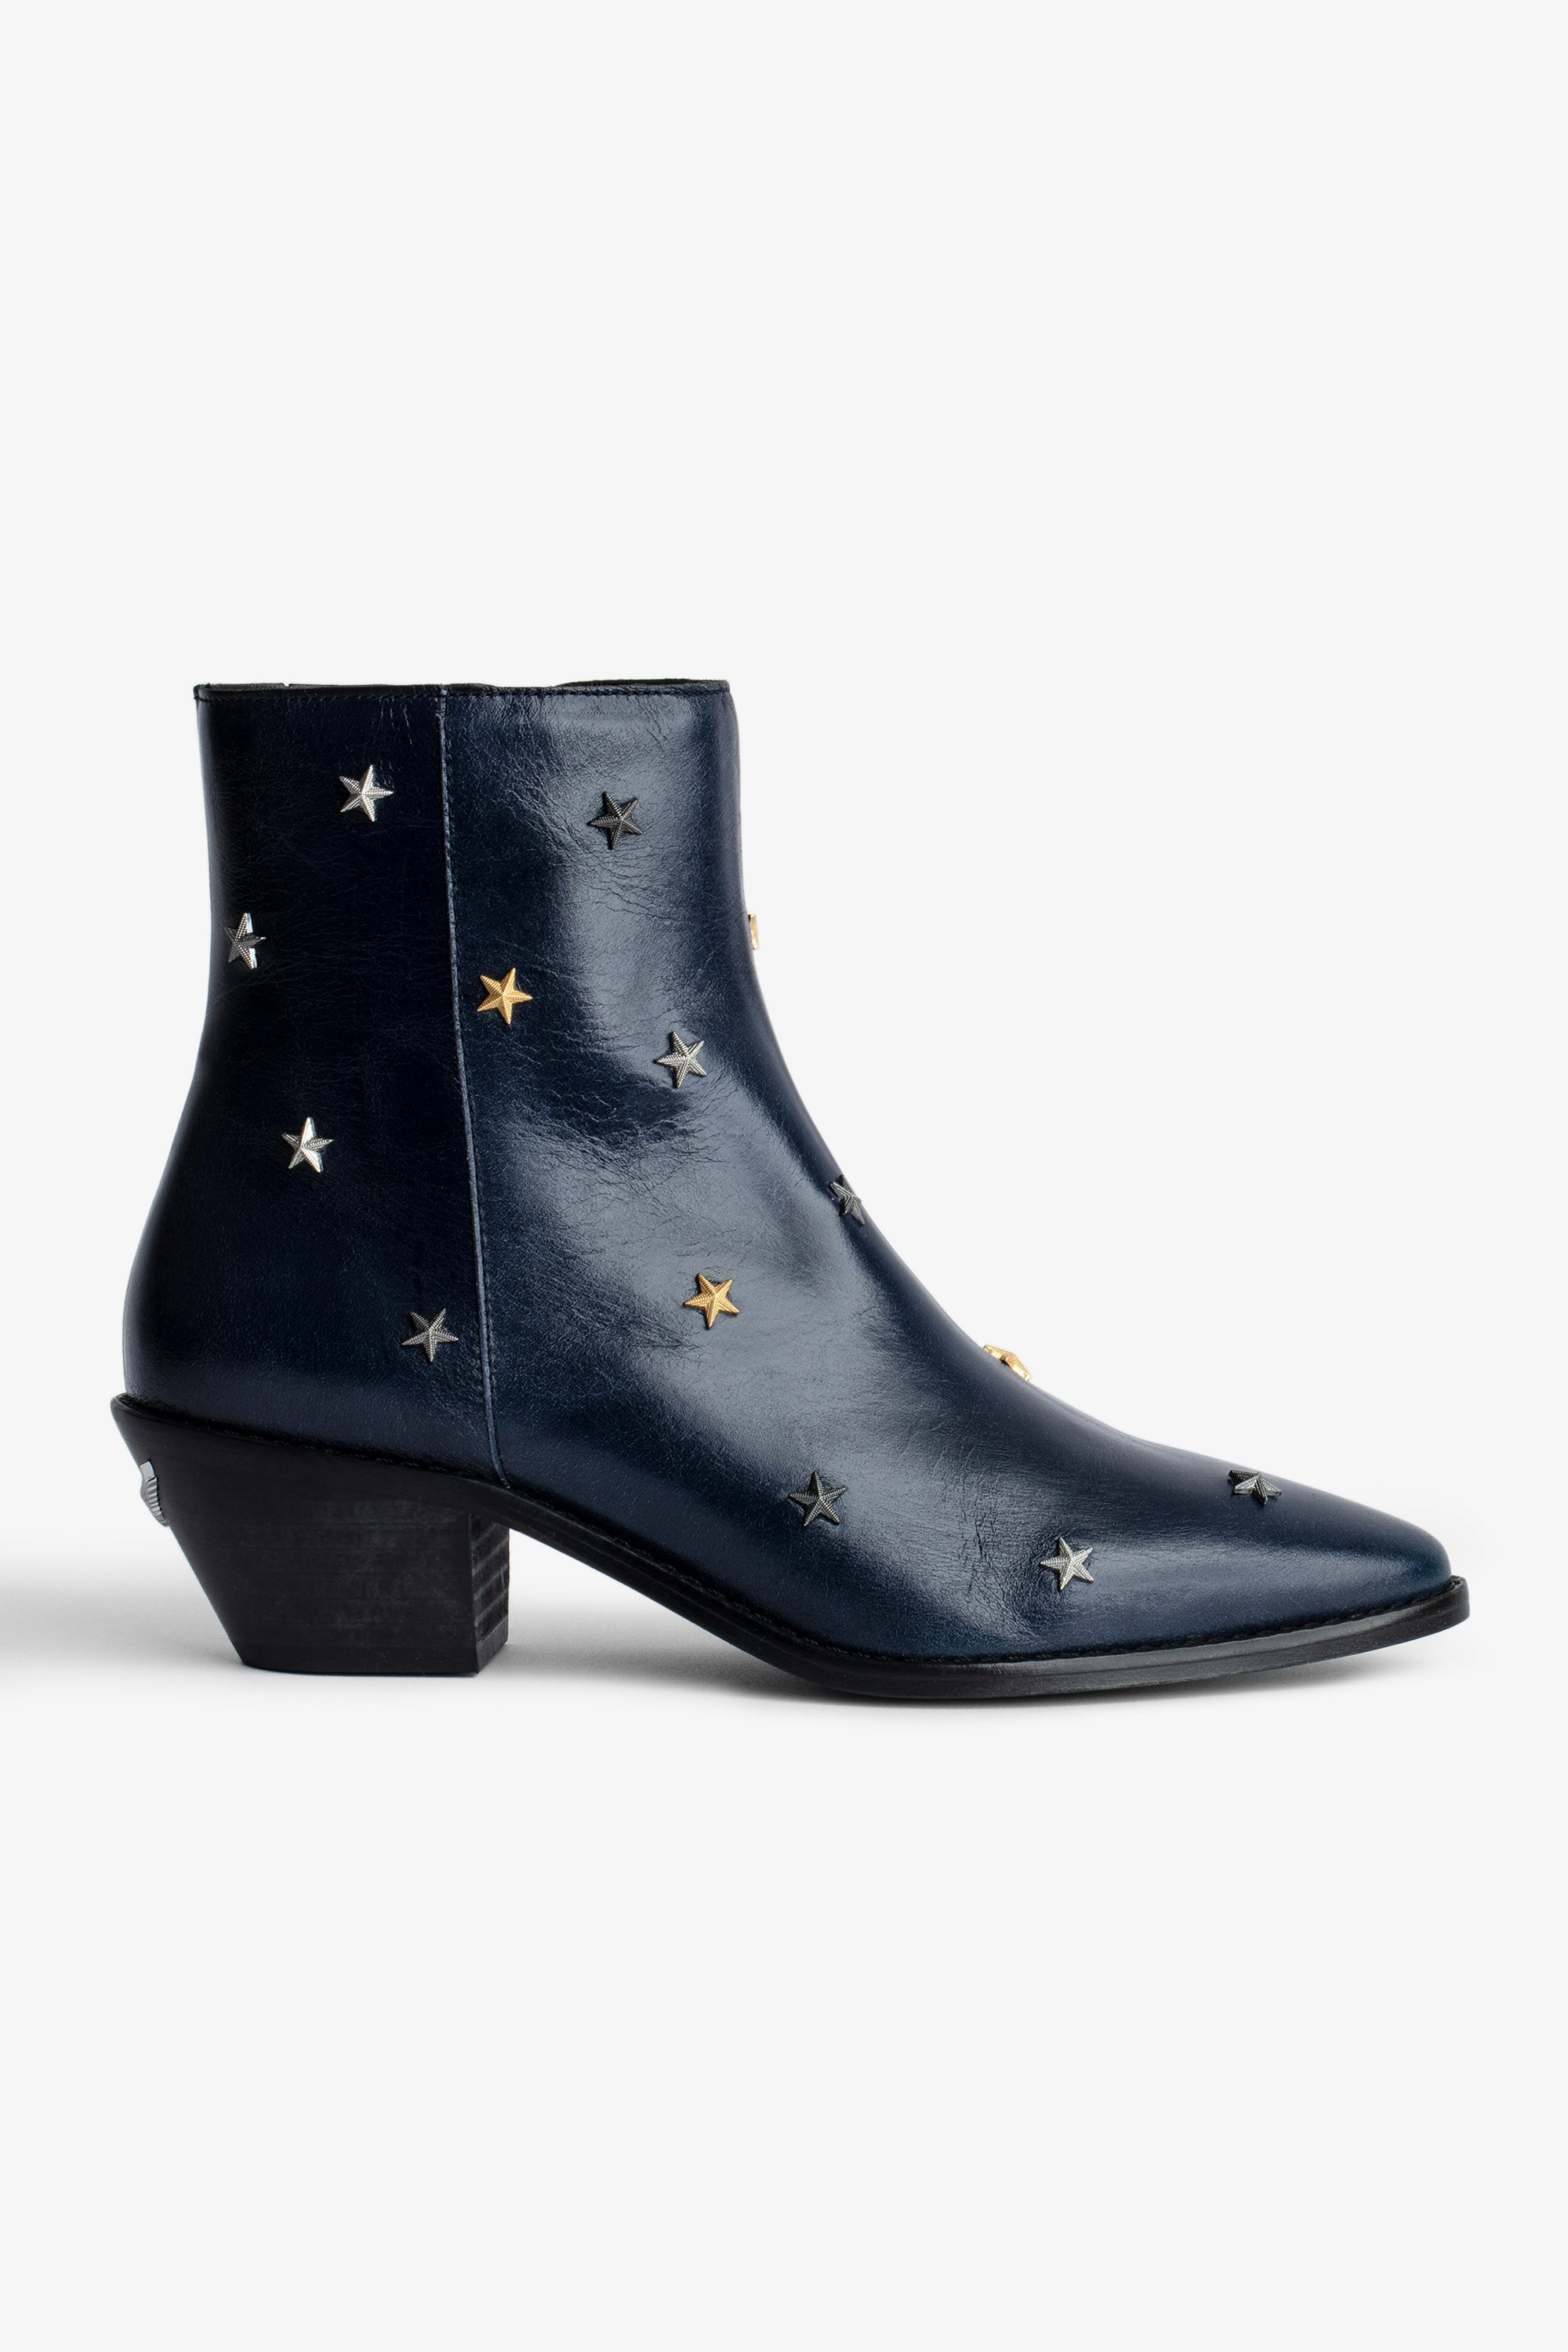 Tyler Vintage Patent Boots - Women’s blue leather ankle boots with star studs.